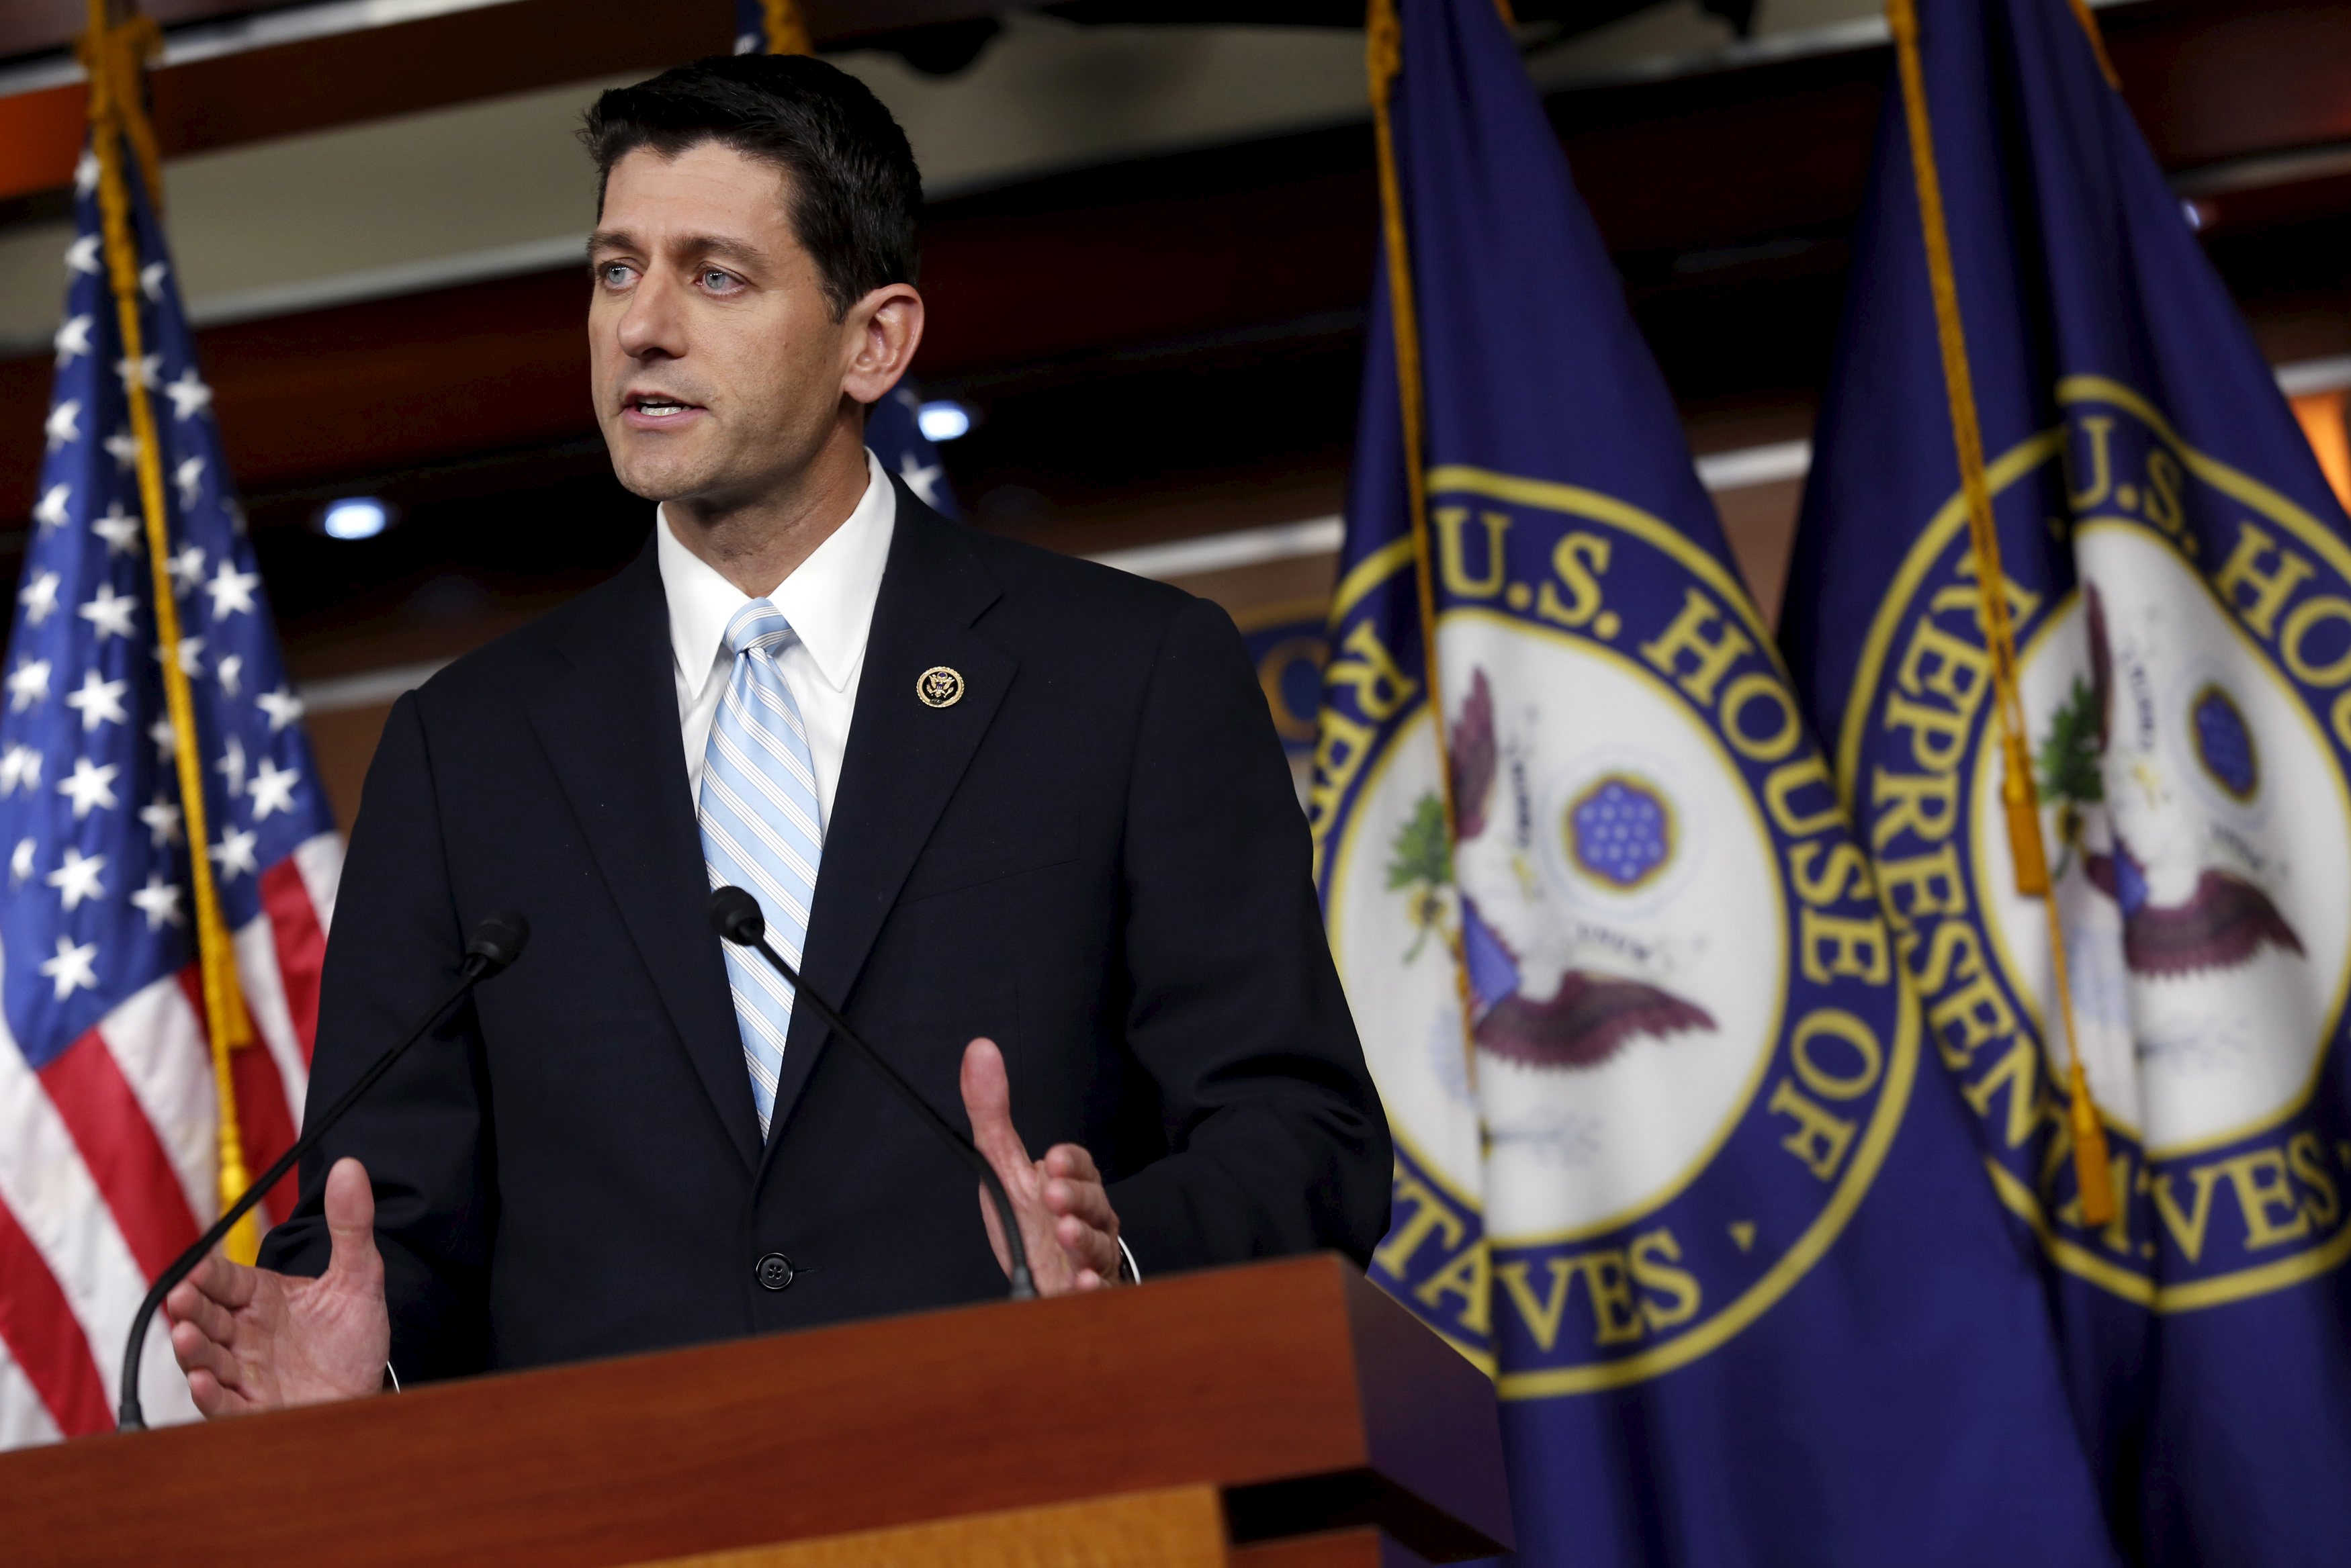 US Representative Paul Ryan speaks at a news conference on Capitol Hill in Washington October 20, 2015. Photo: Reuters